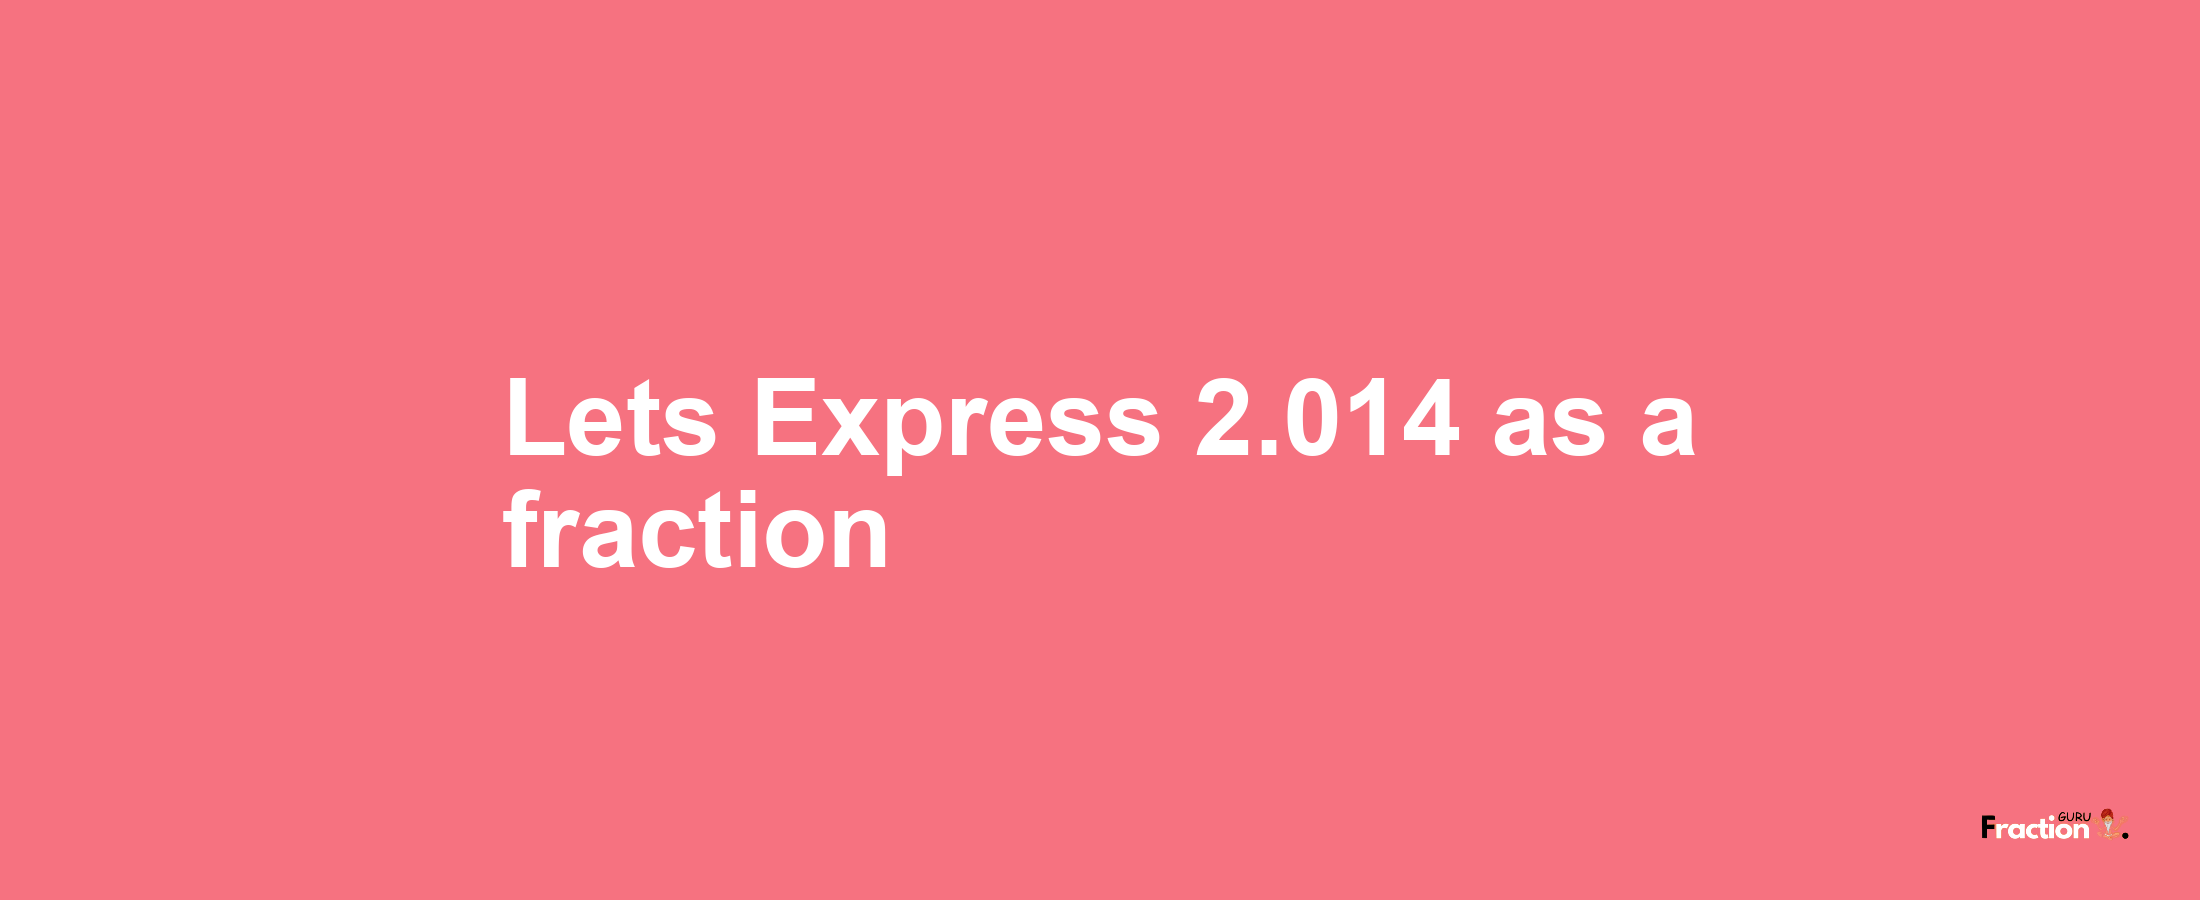 Lets Express 2.014 as afraction